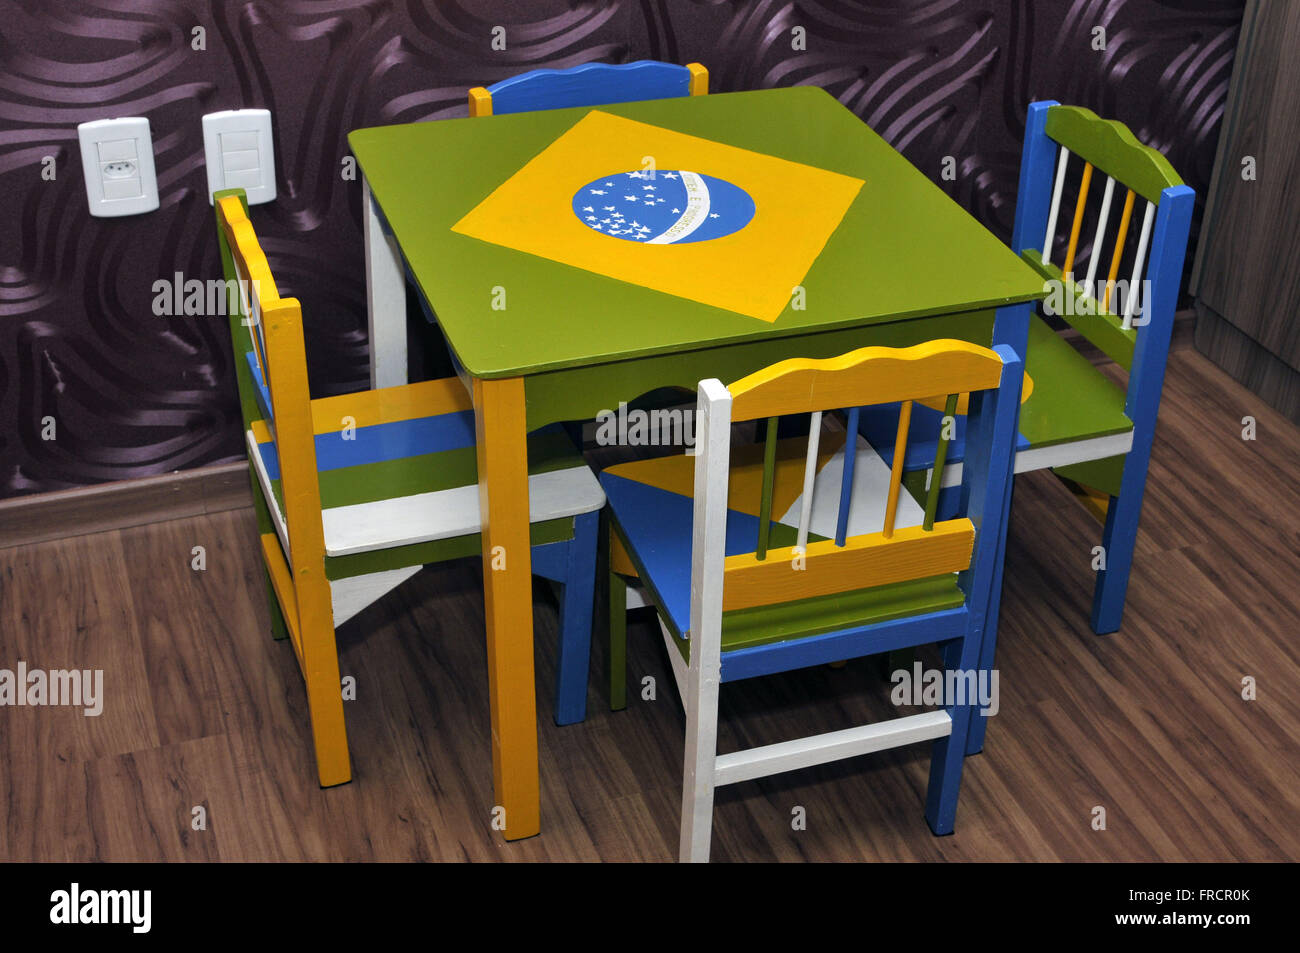 Table for kids decorated with the flag of Brazil Stock Photo